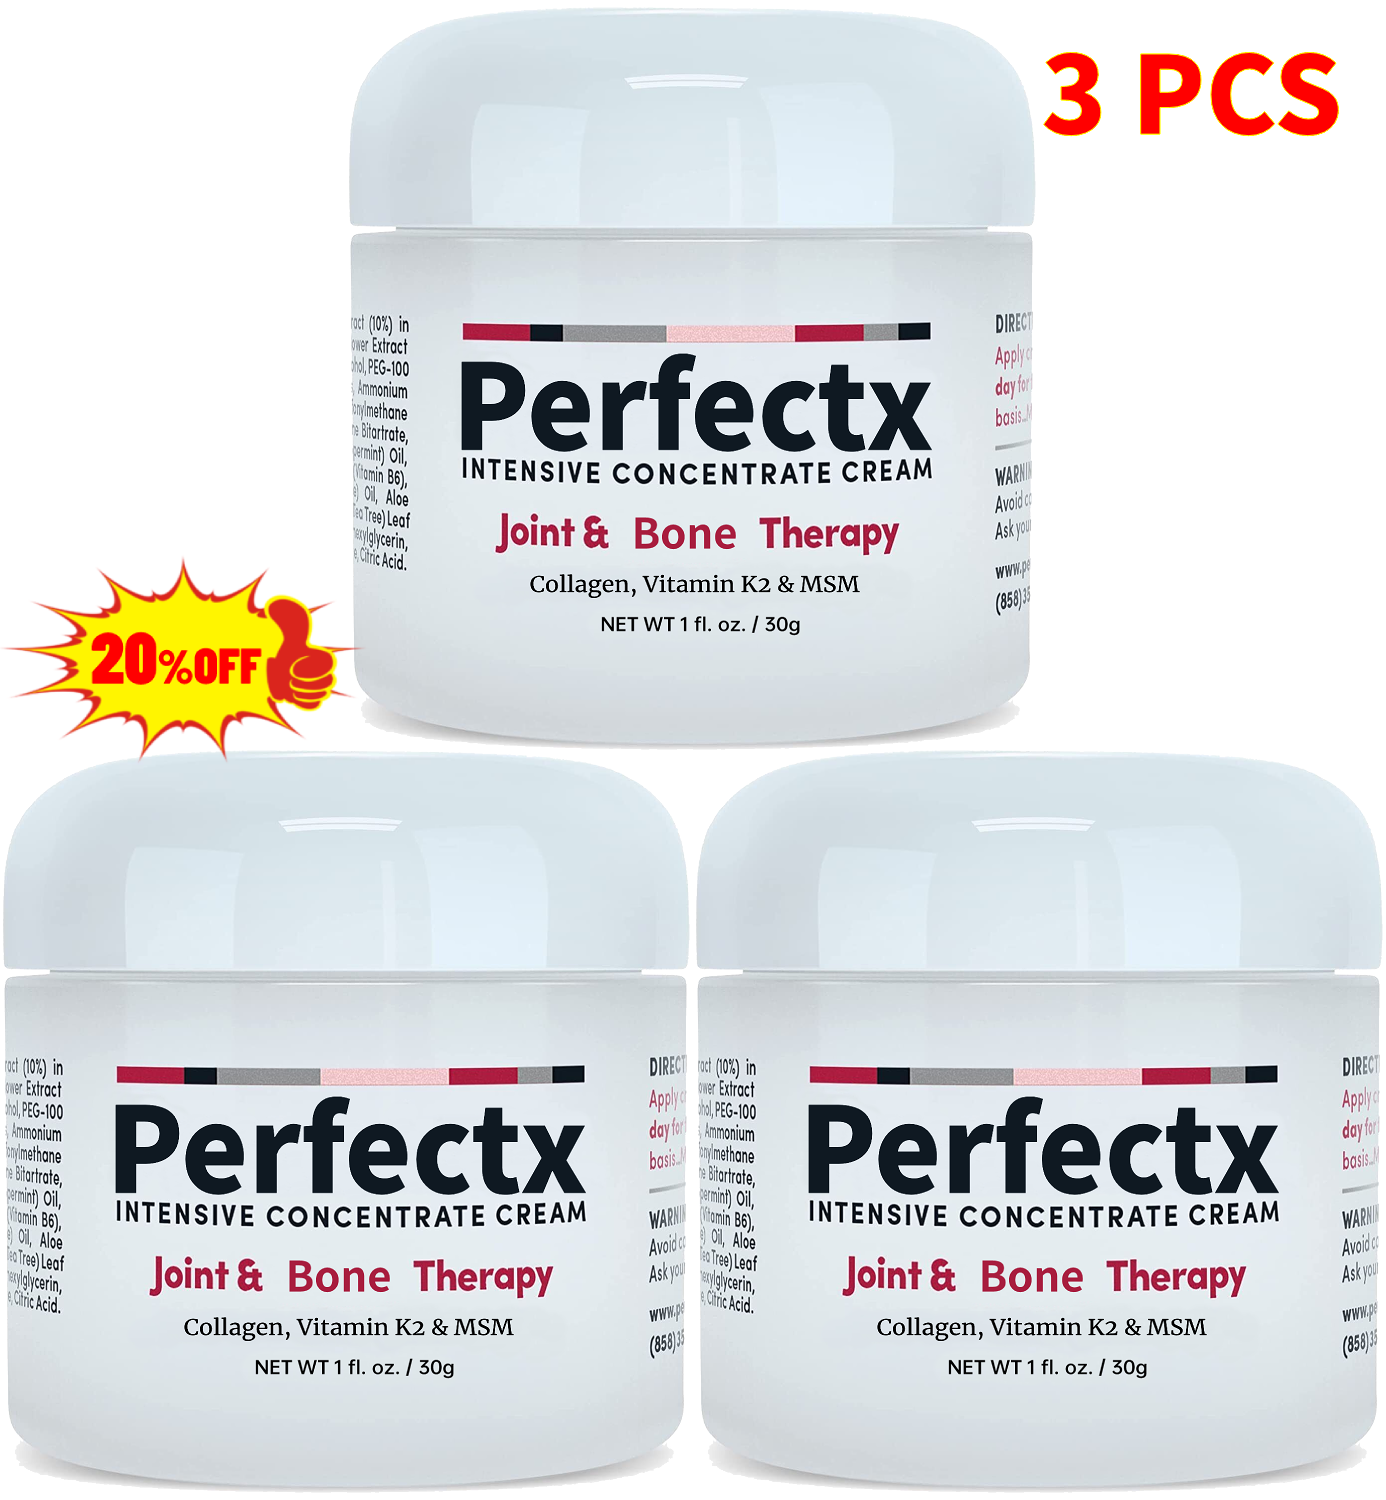 3PCS Perfectx Joint & Muscle Therapy for Relief & Recovery, 1 Oz. Cream Unbranded Does Not Apply